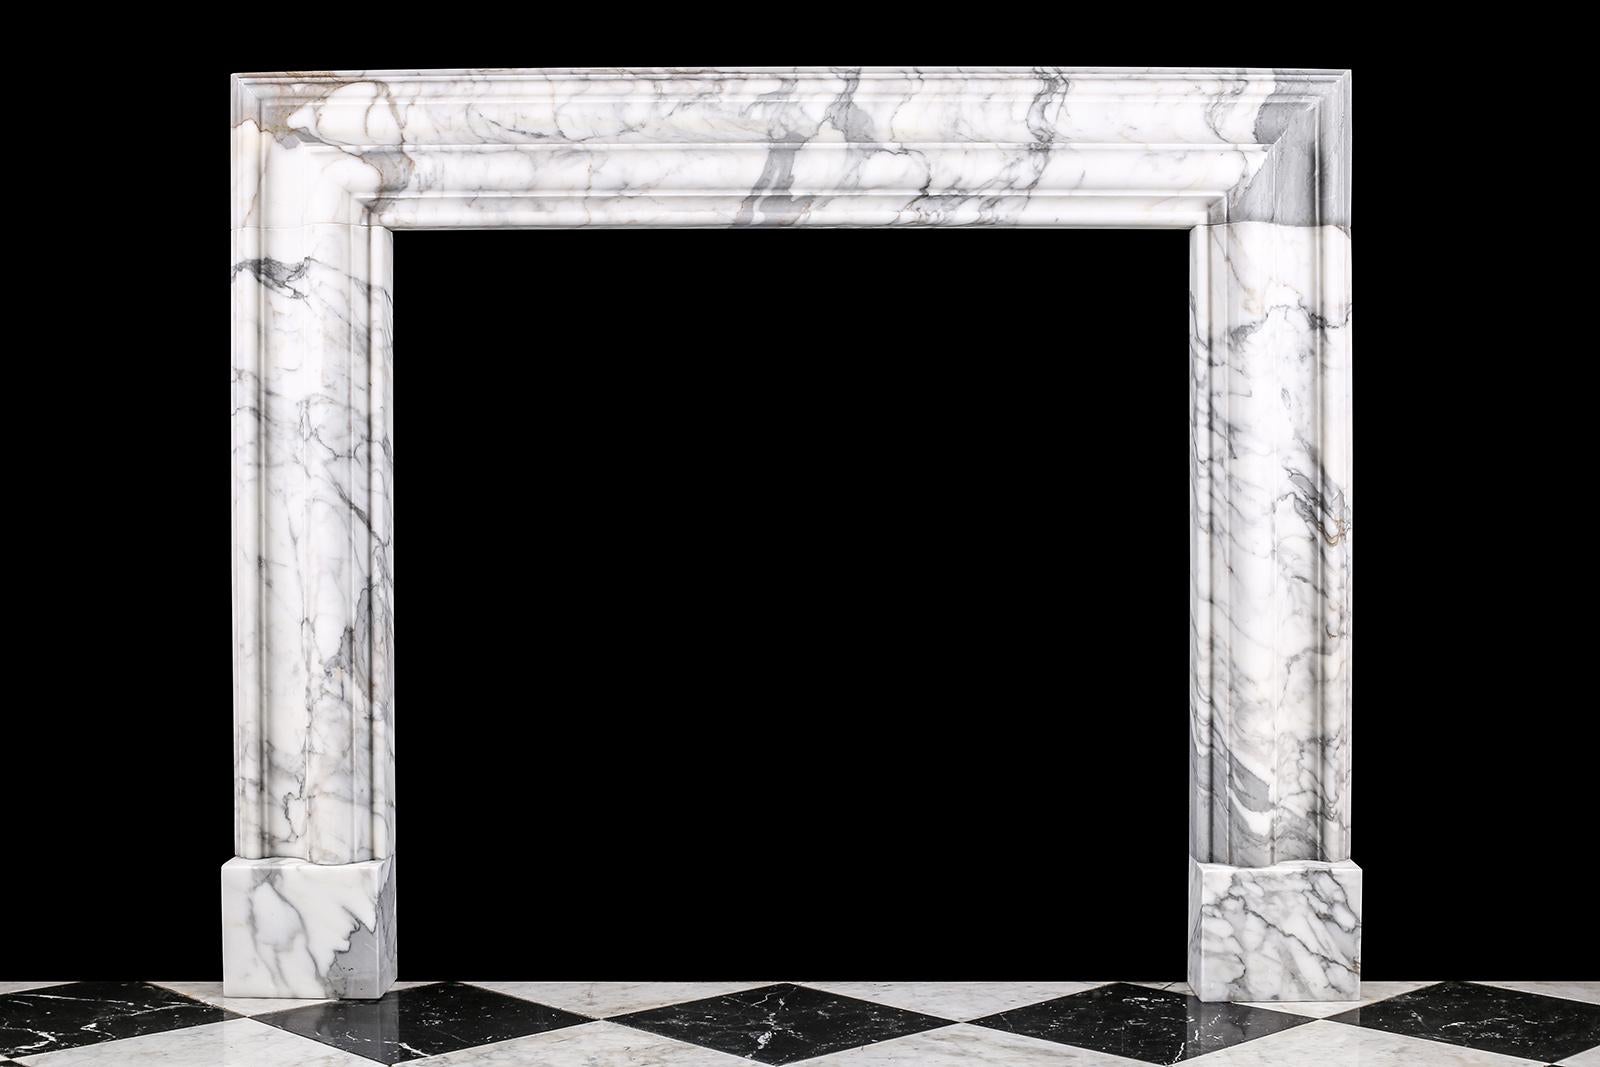 Baroque Bolection Chimneypiece in Italian white statuary marble fireplace

A Baroque style Bolection fireplace surround of bold proportions with very finely carved columns with a rising ogee edging, which are supported on substantial footblocks,